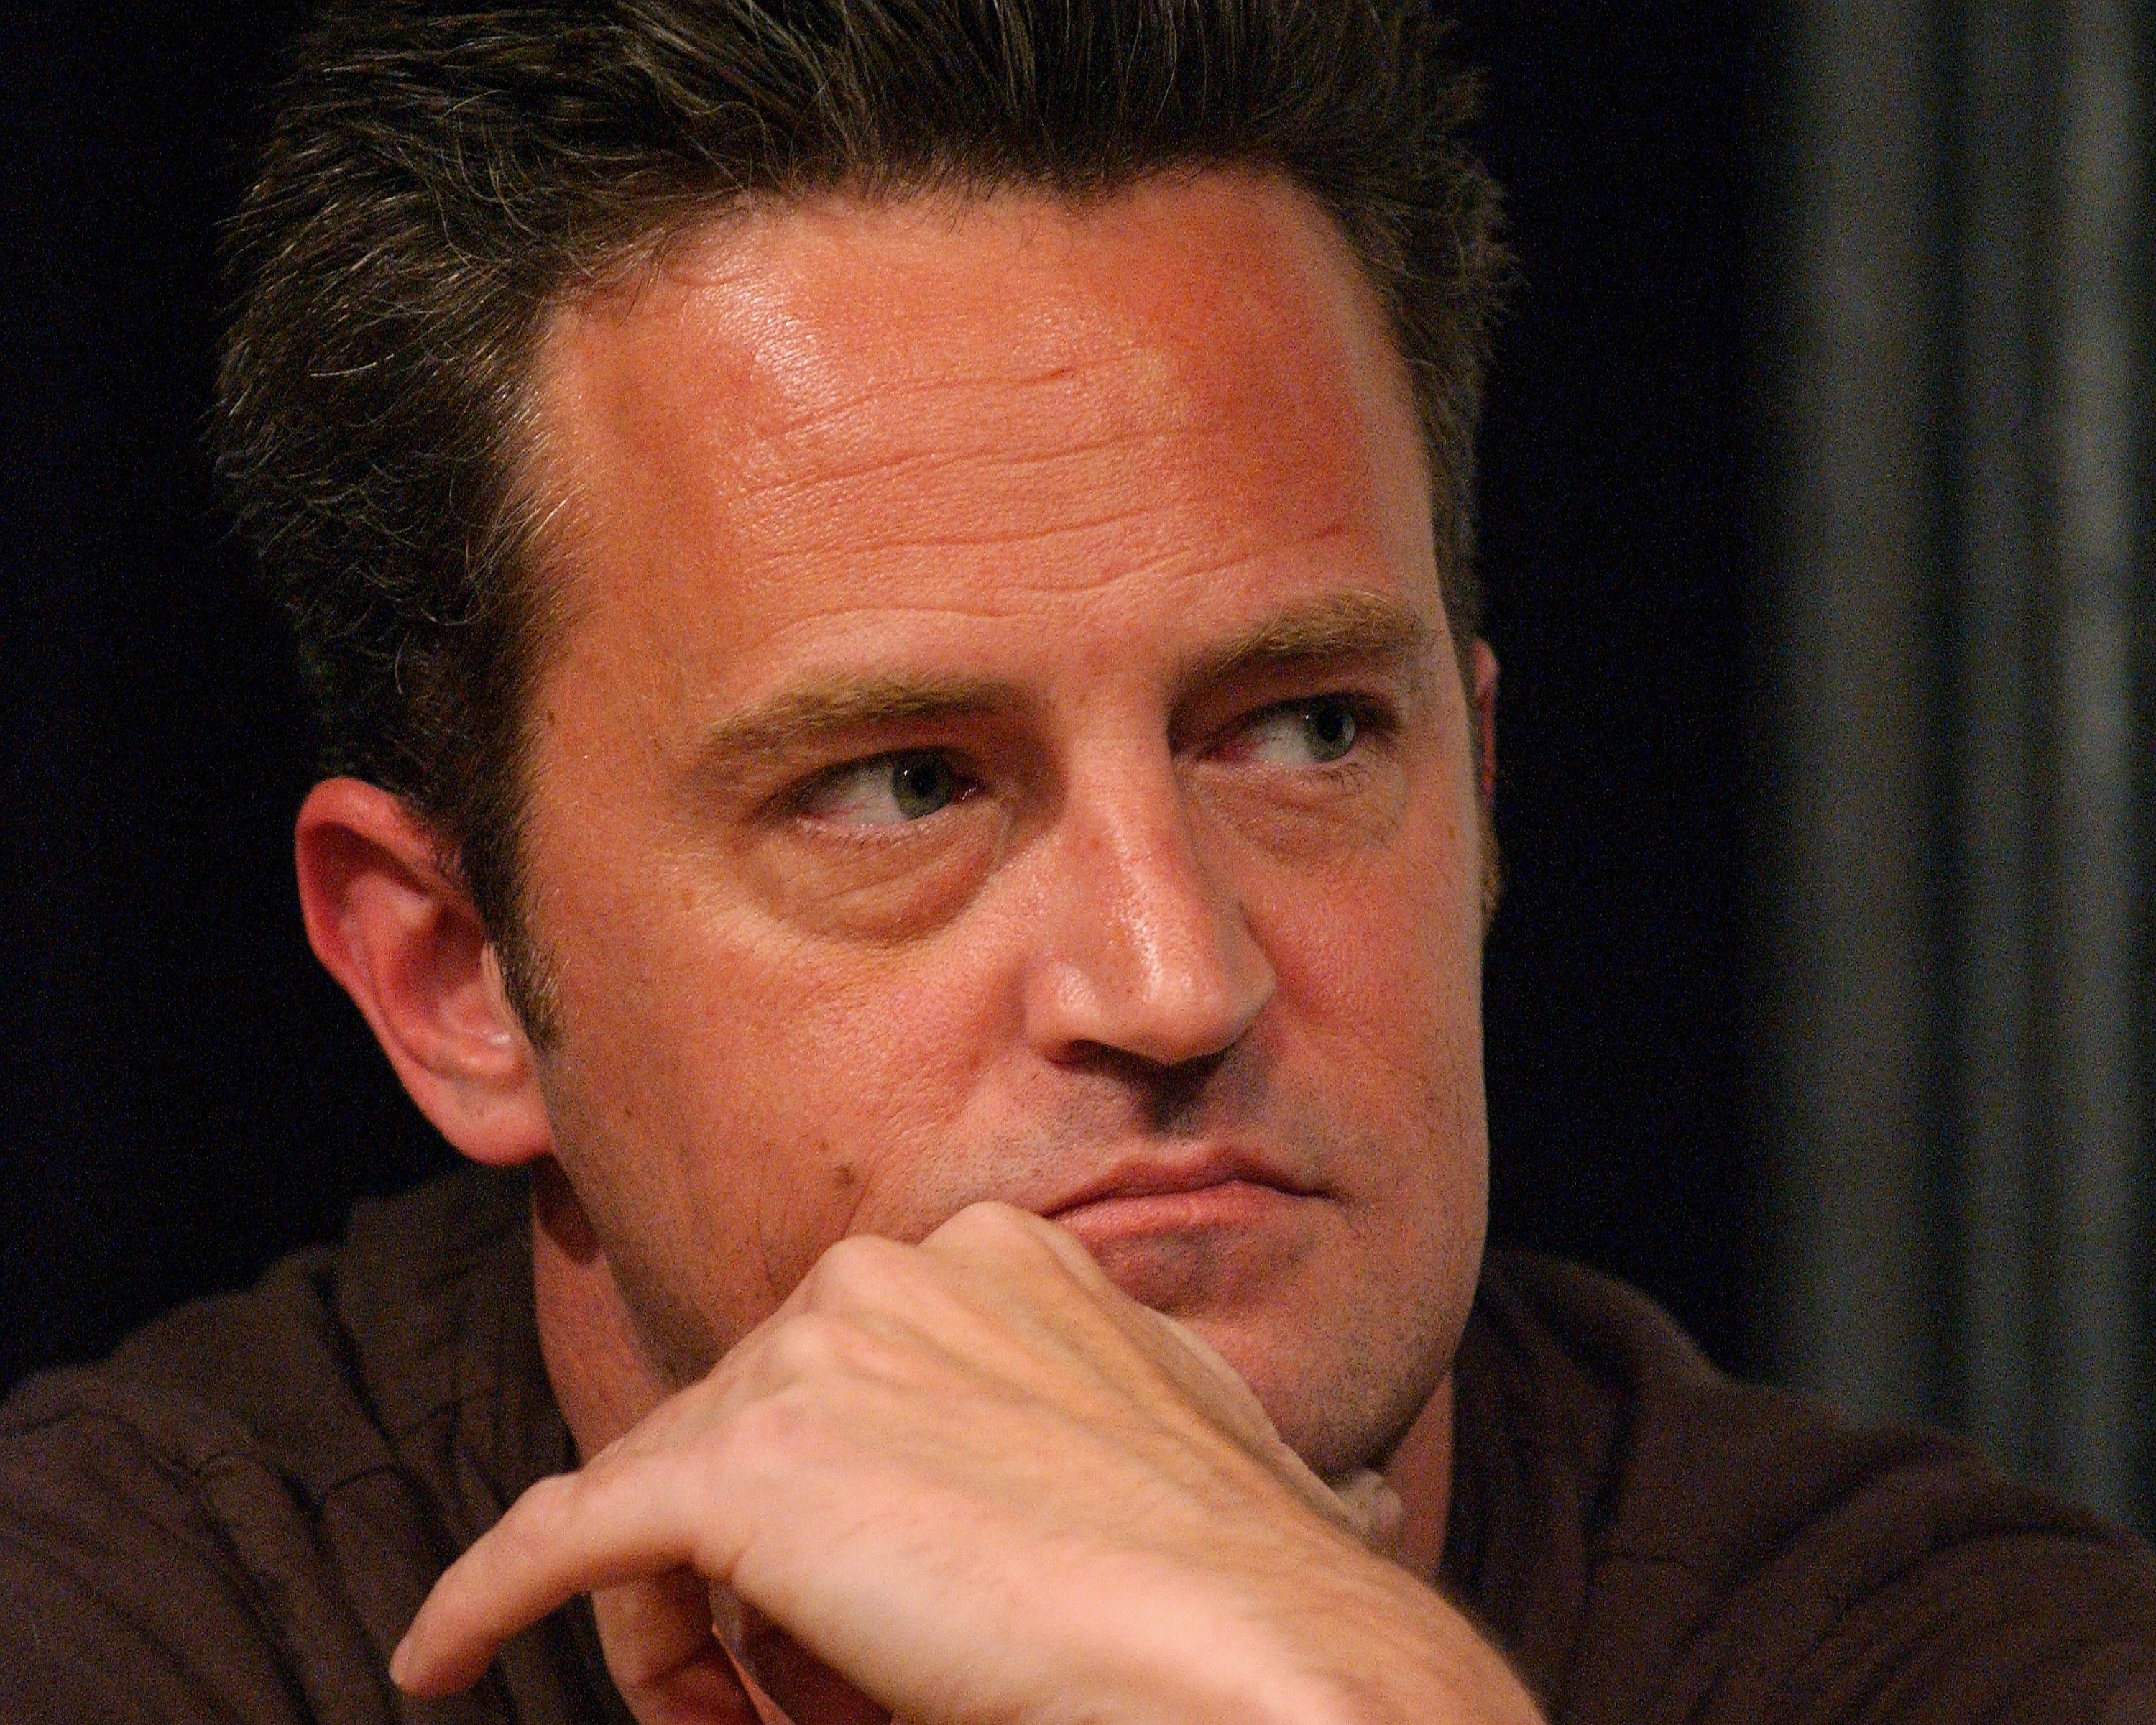 Matthew Perry plays "The Match Game" at The UCB Theatre on November 9, 2007 in Hollywood, California | Source: Getty Images